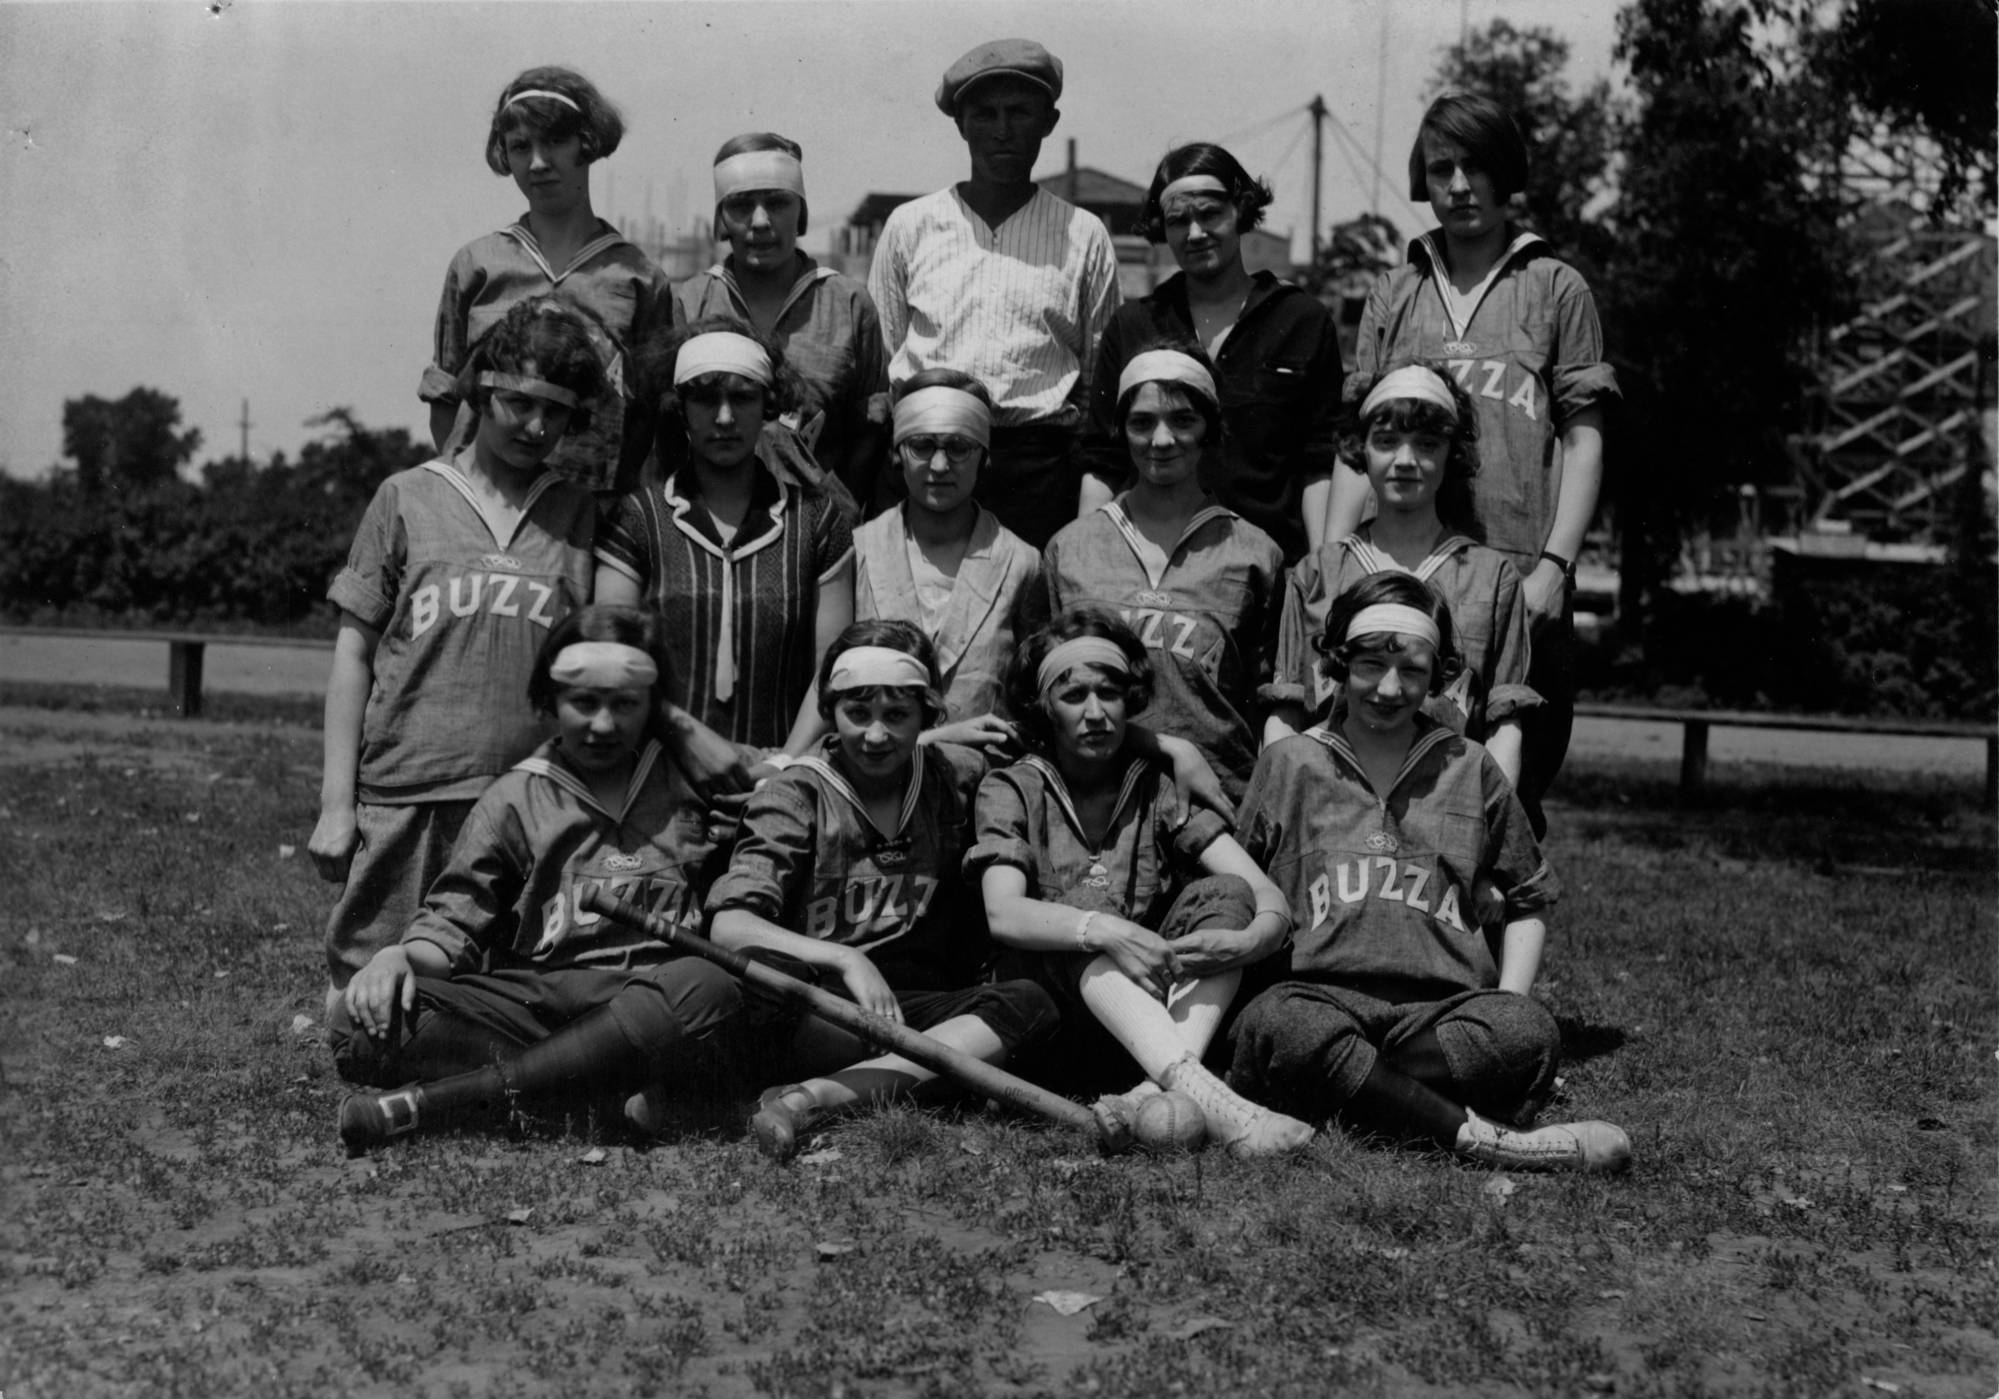 This photo features the Buzza Women's Baseball Team in 1924.